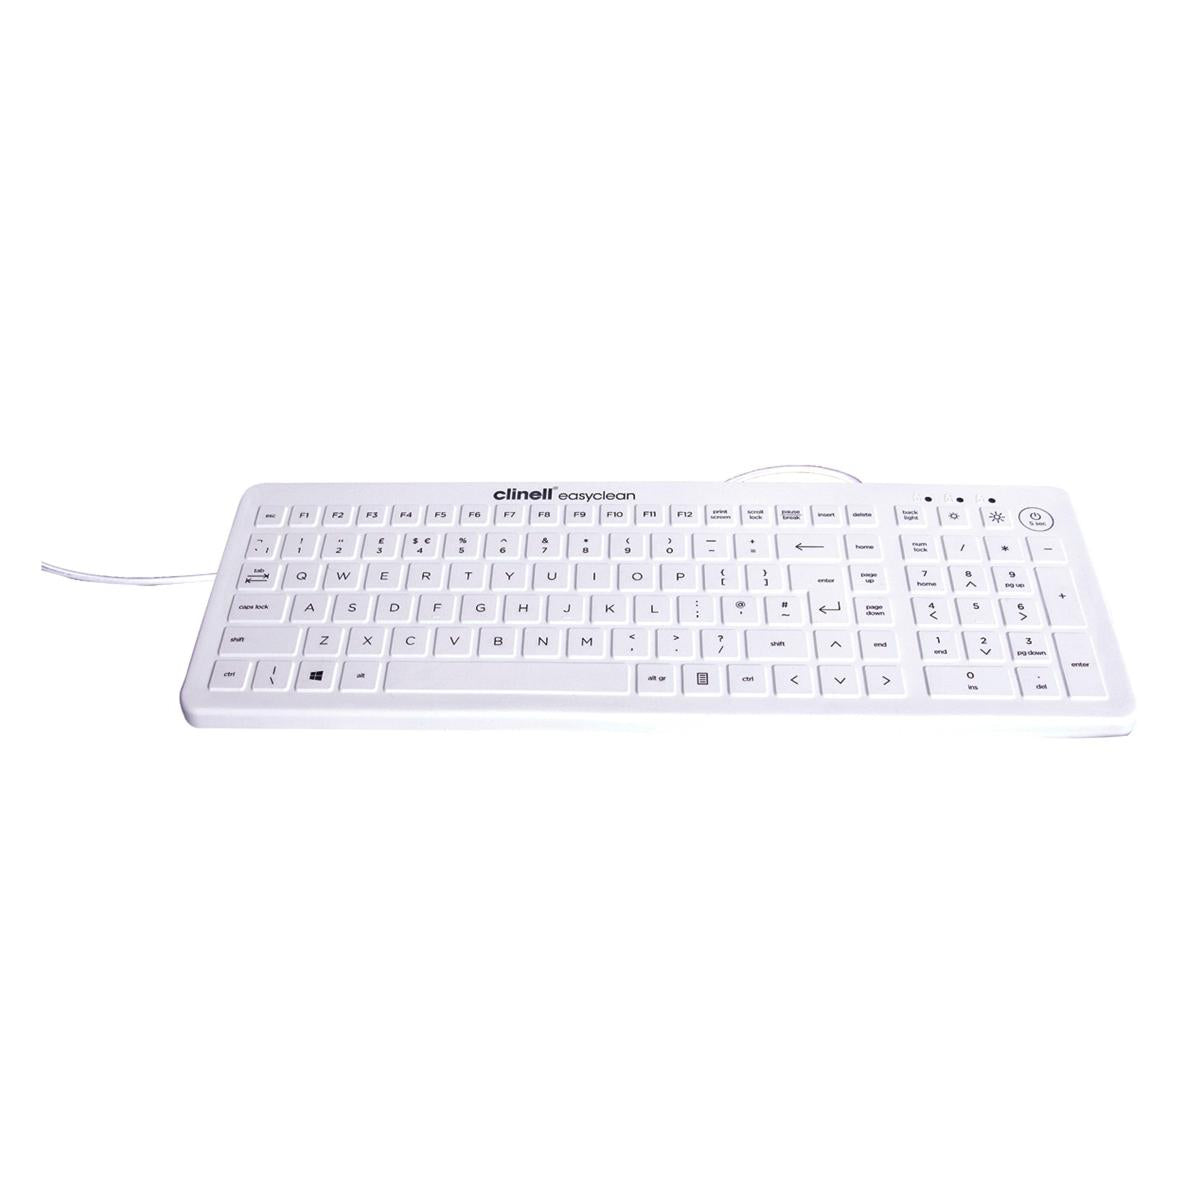 Clinell EasyClean Keyboards, available from Keyboard Specialists Ltd (KBS)